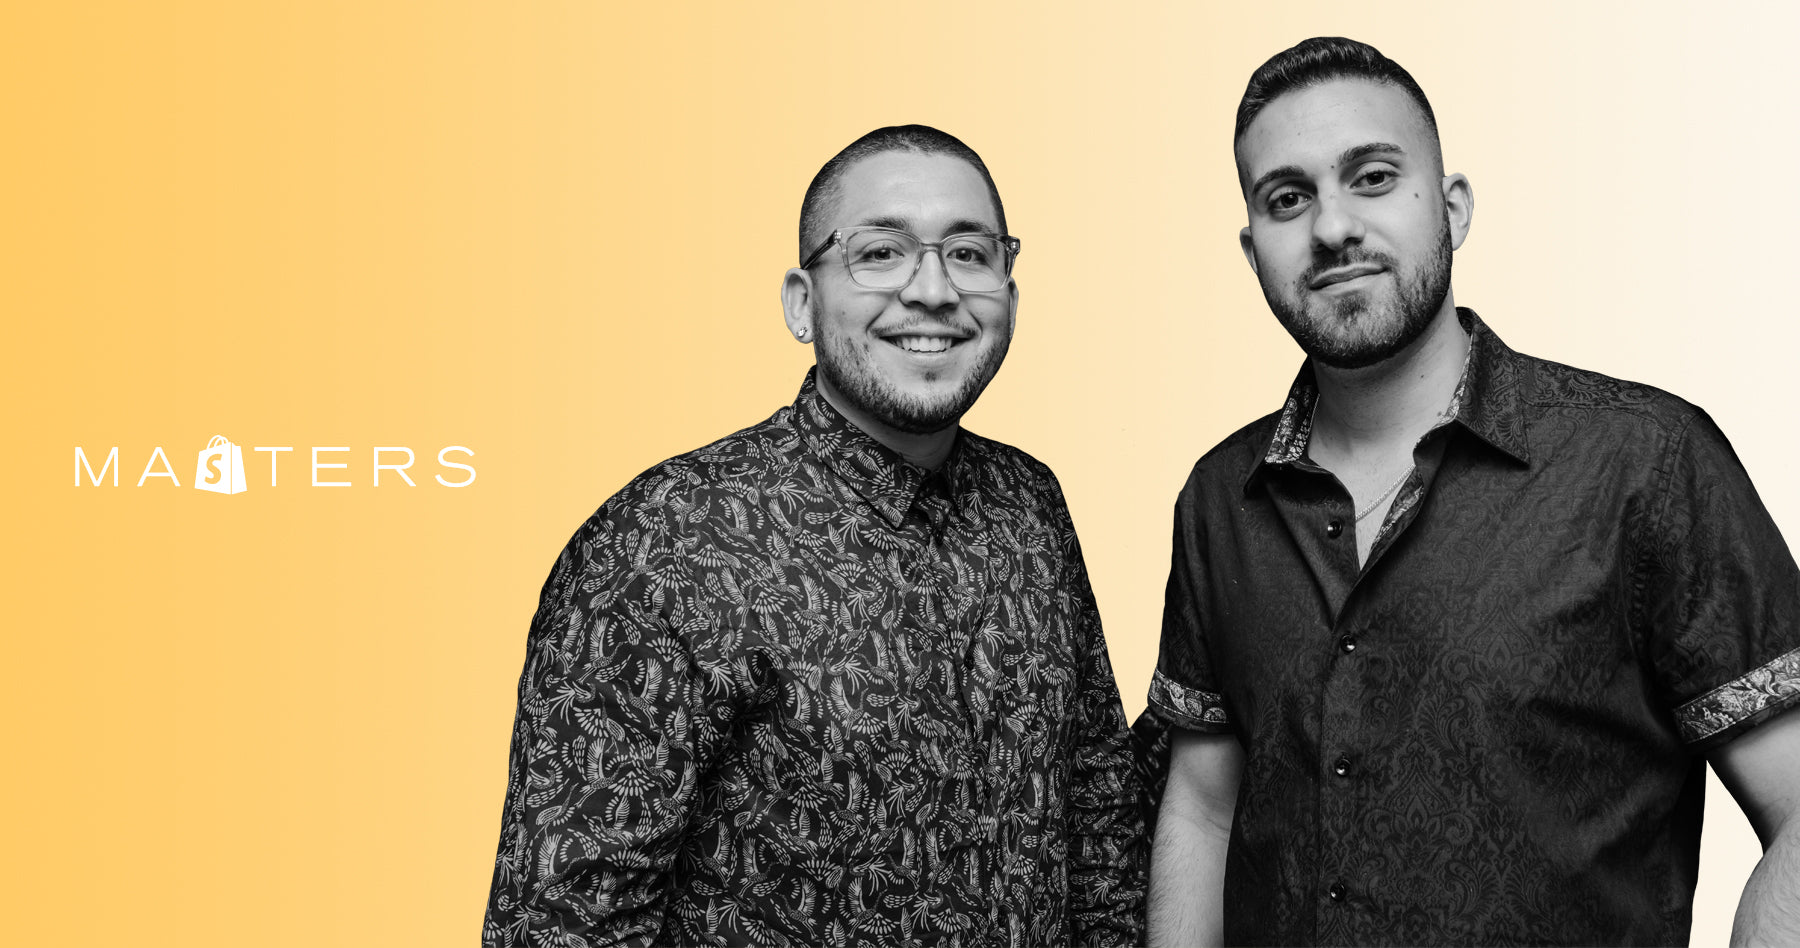 Co-founders of Truff, Nick Guillen and Nick Ajluni.